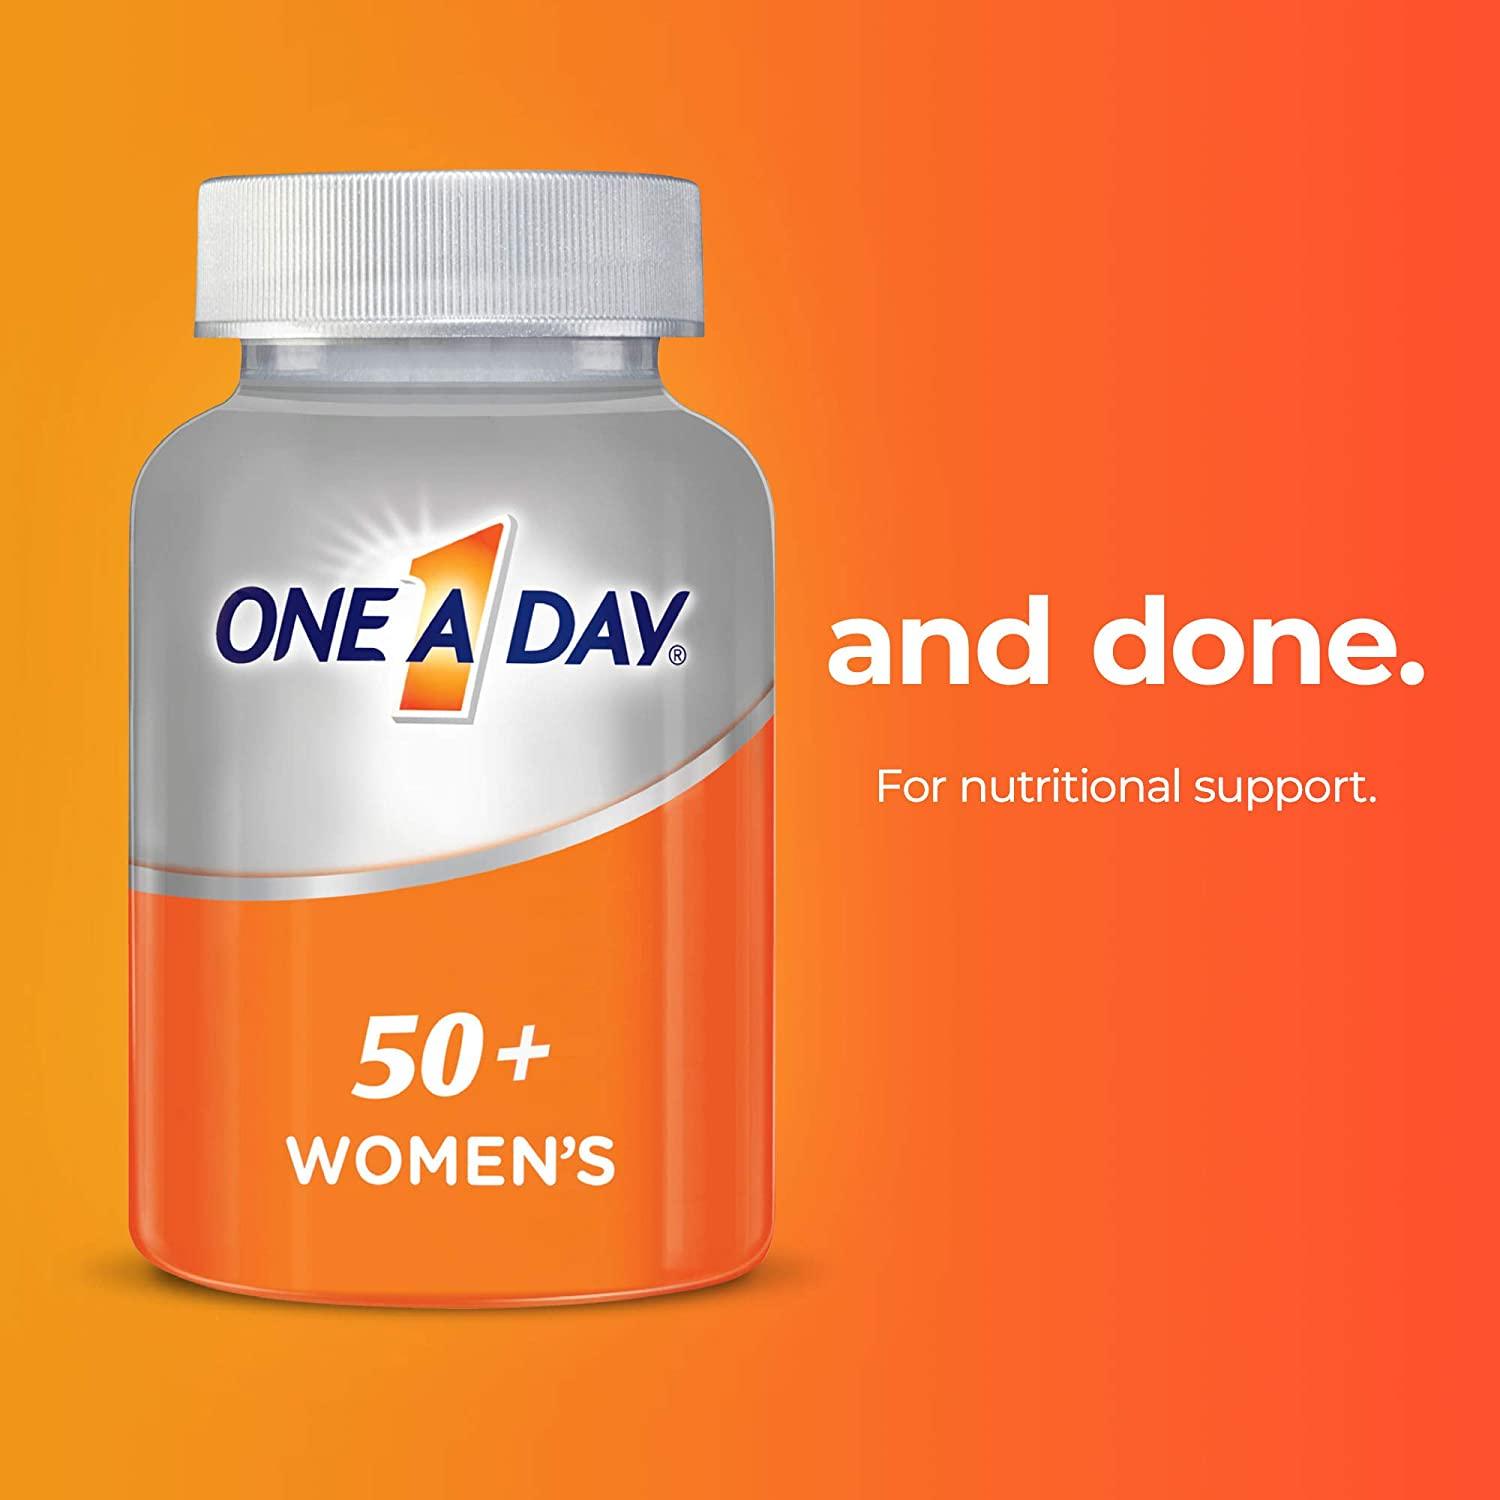 One a Day Women’S 50+ Multivitamins, Supplement with Vitamin A, Vitamin C, Vitamin D, Vitamin E and Zinc for Immune Health Support, Calcium & More, 175 Count